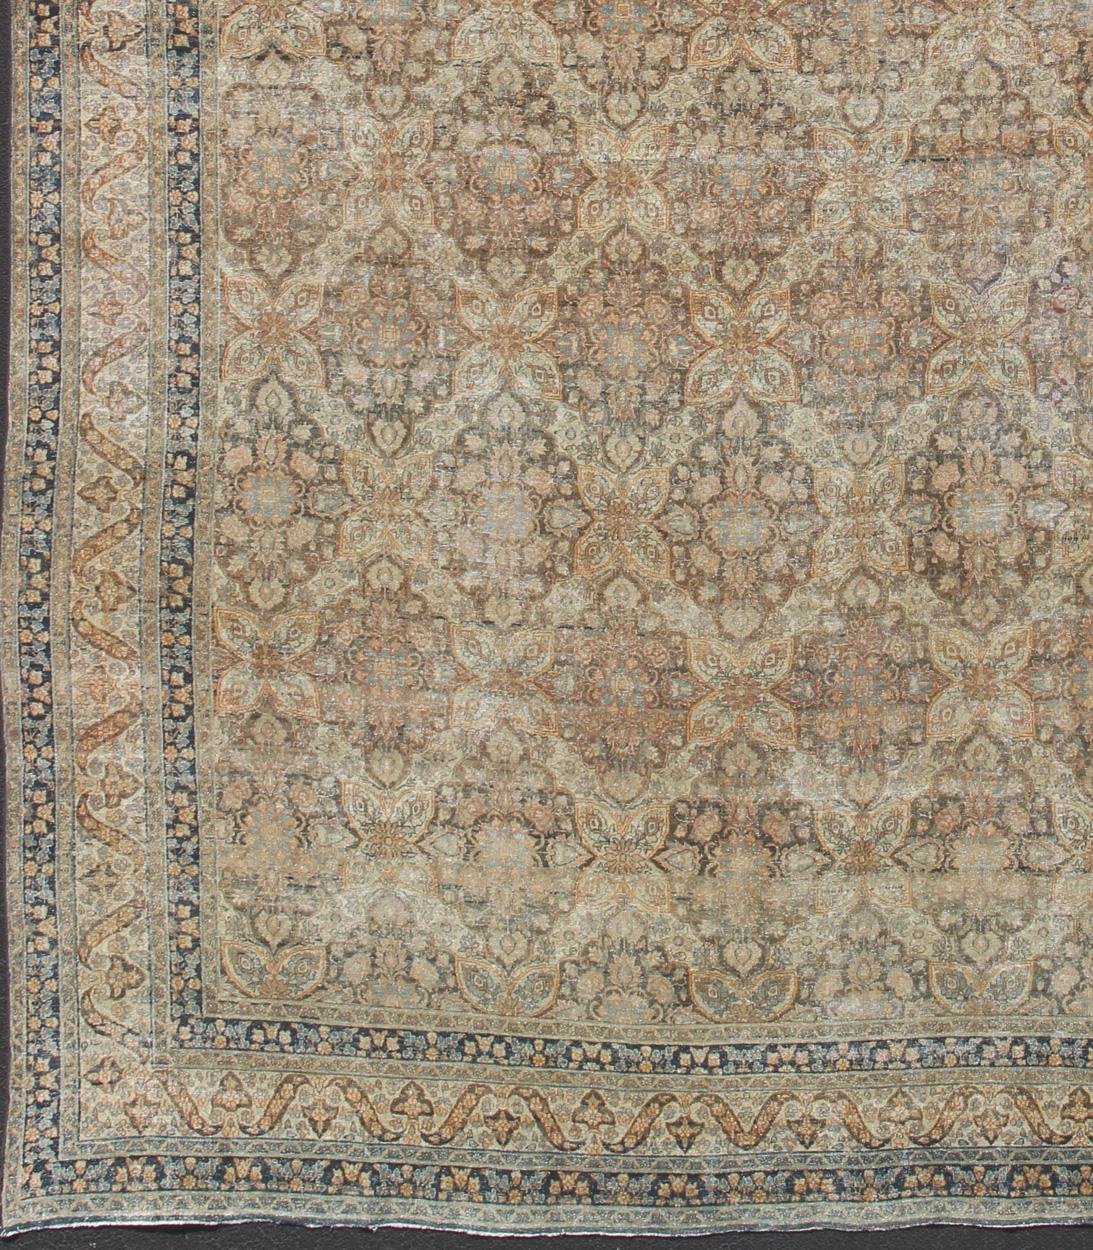 Antique Persian Yzad rug with all-over pattern from Persia with Elegant Medallion floral geometric design, rug 19-0607, country of origin / type: Iran / Yzad, circa 1910.

This antique Persian Yzad carpet (circa early 20th century) features a